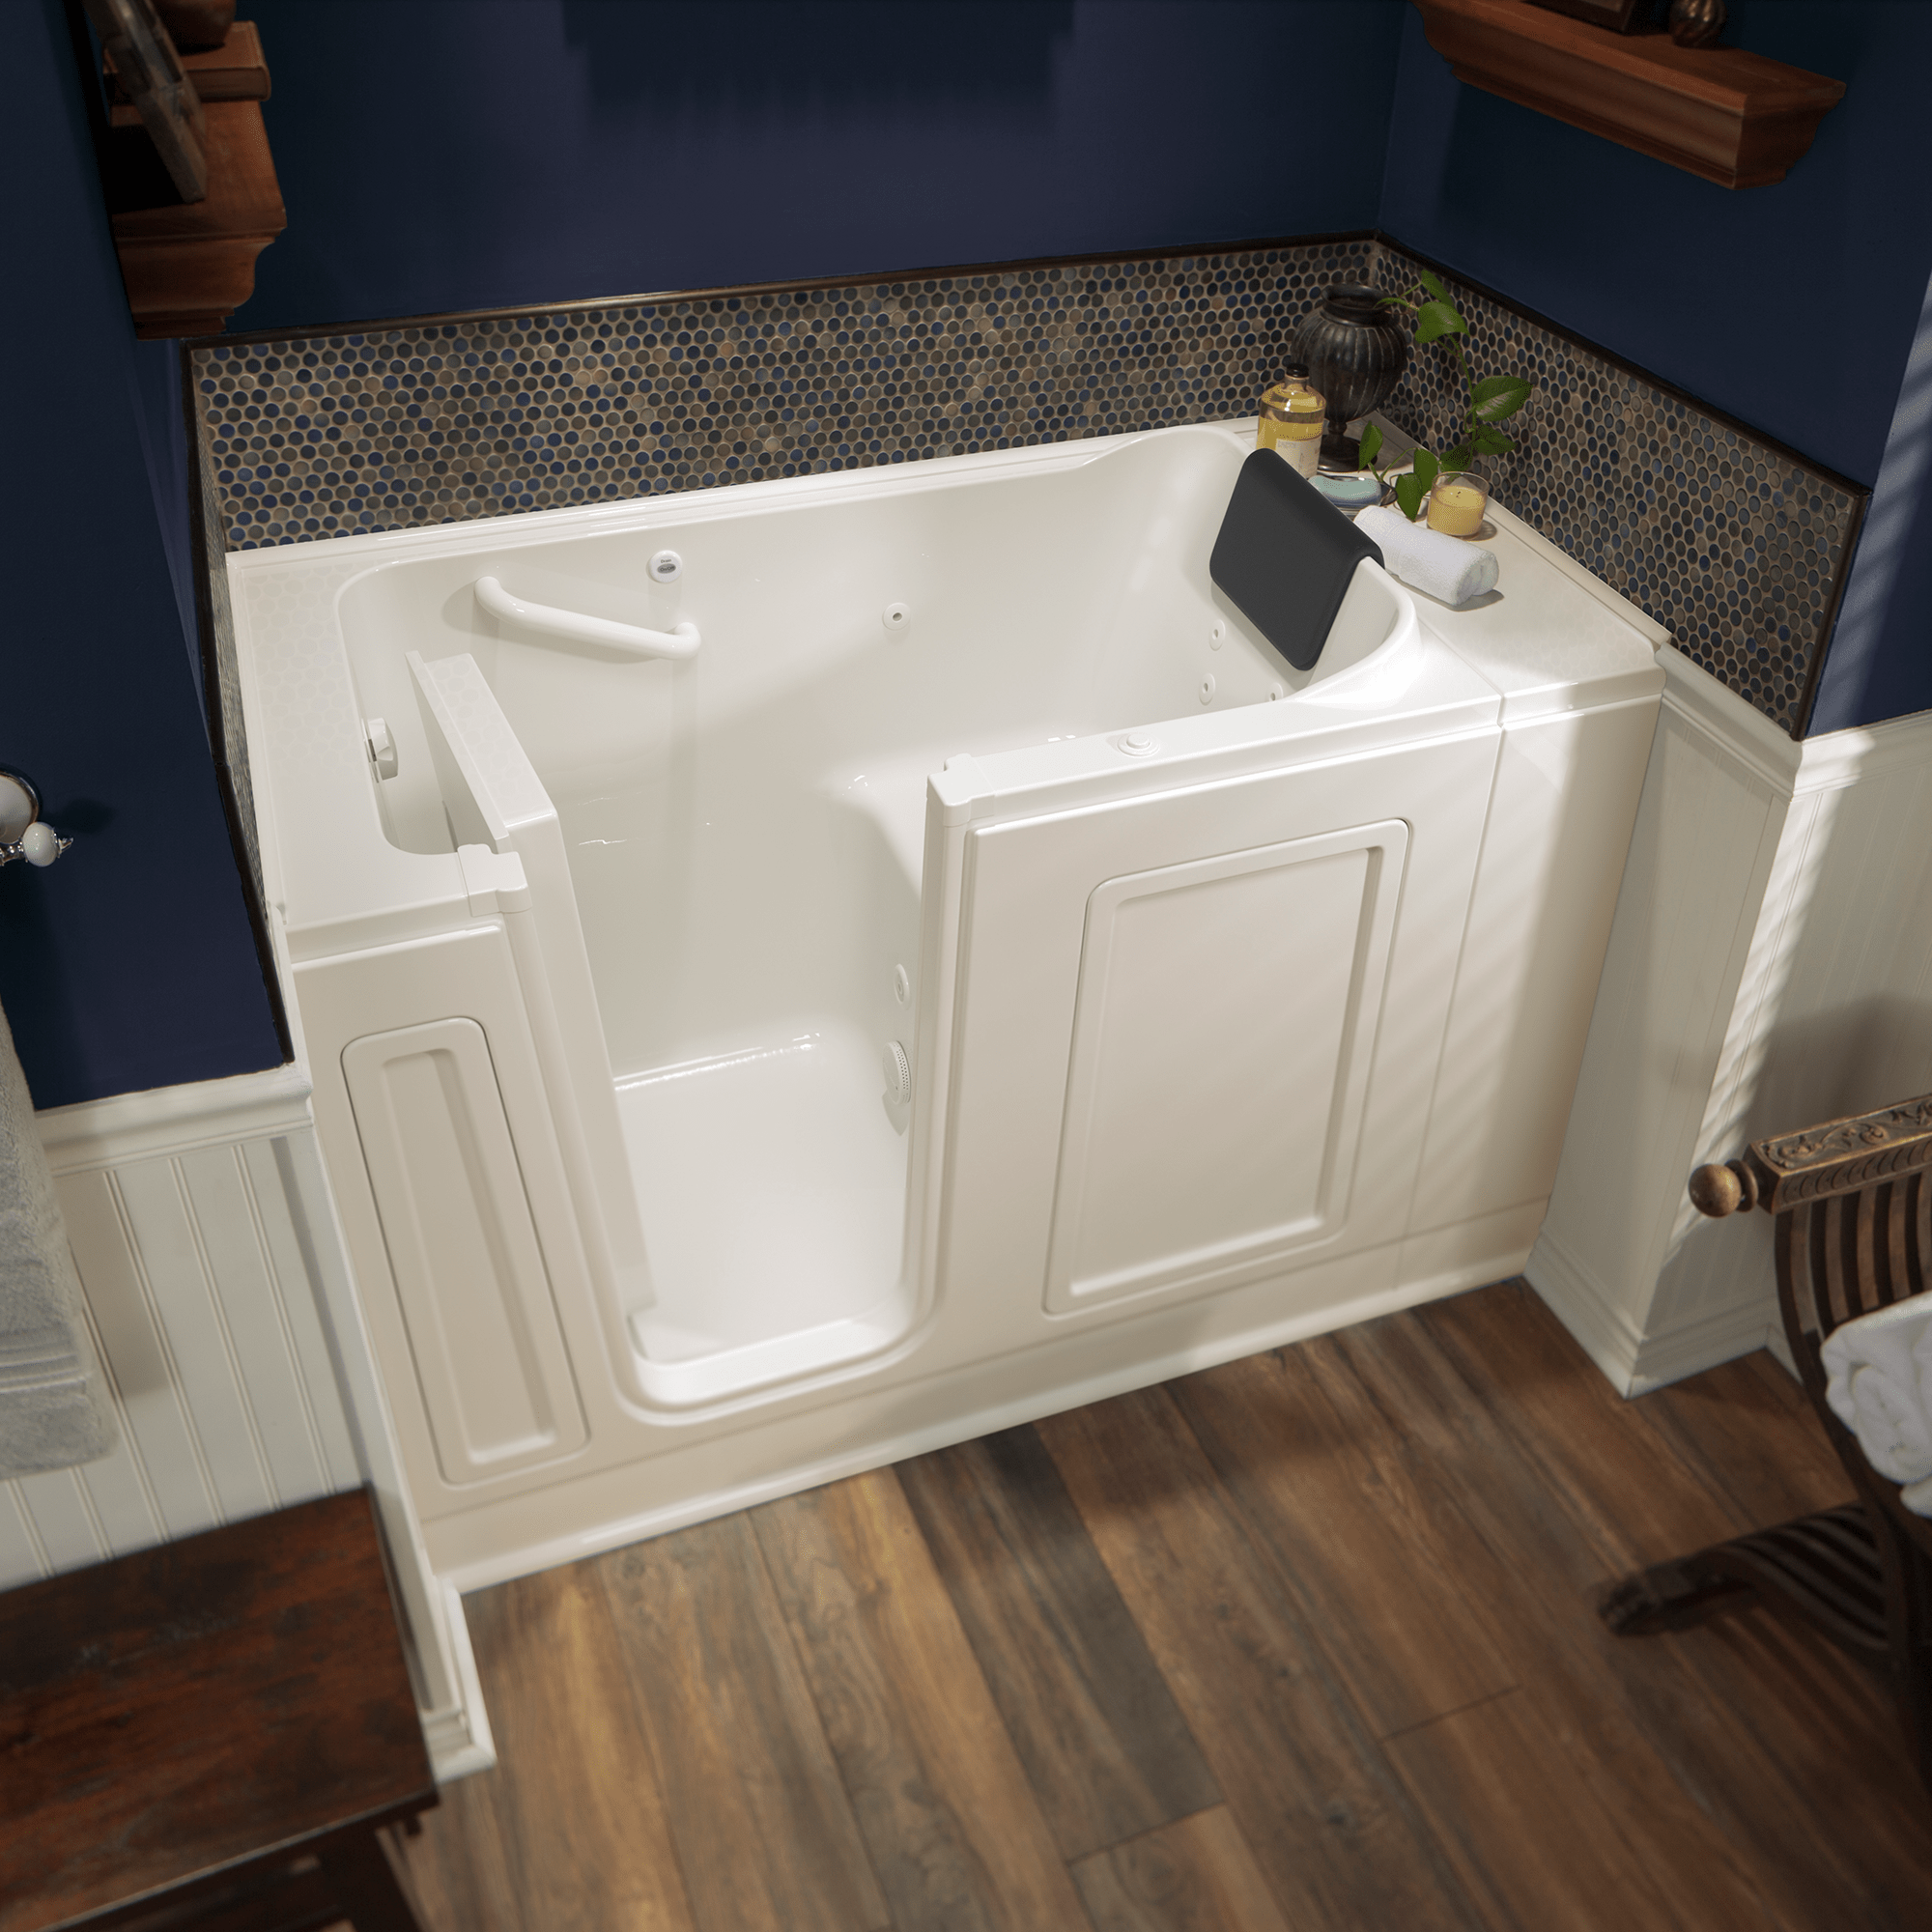 Acrylic Luxury Series 30 x 51 -Inch Walk-in Tub With Whirlpool System - Left-Hand Drain